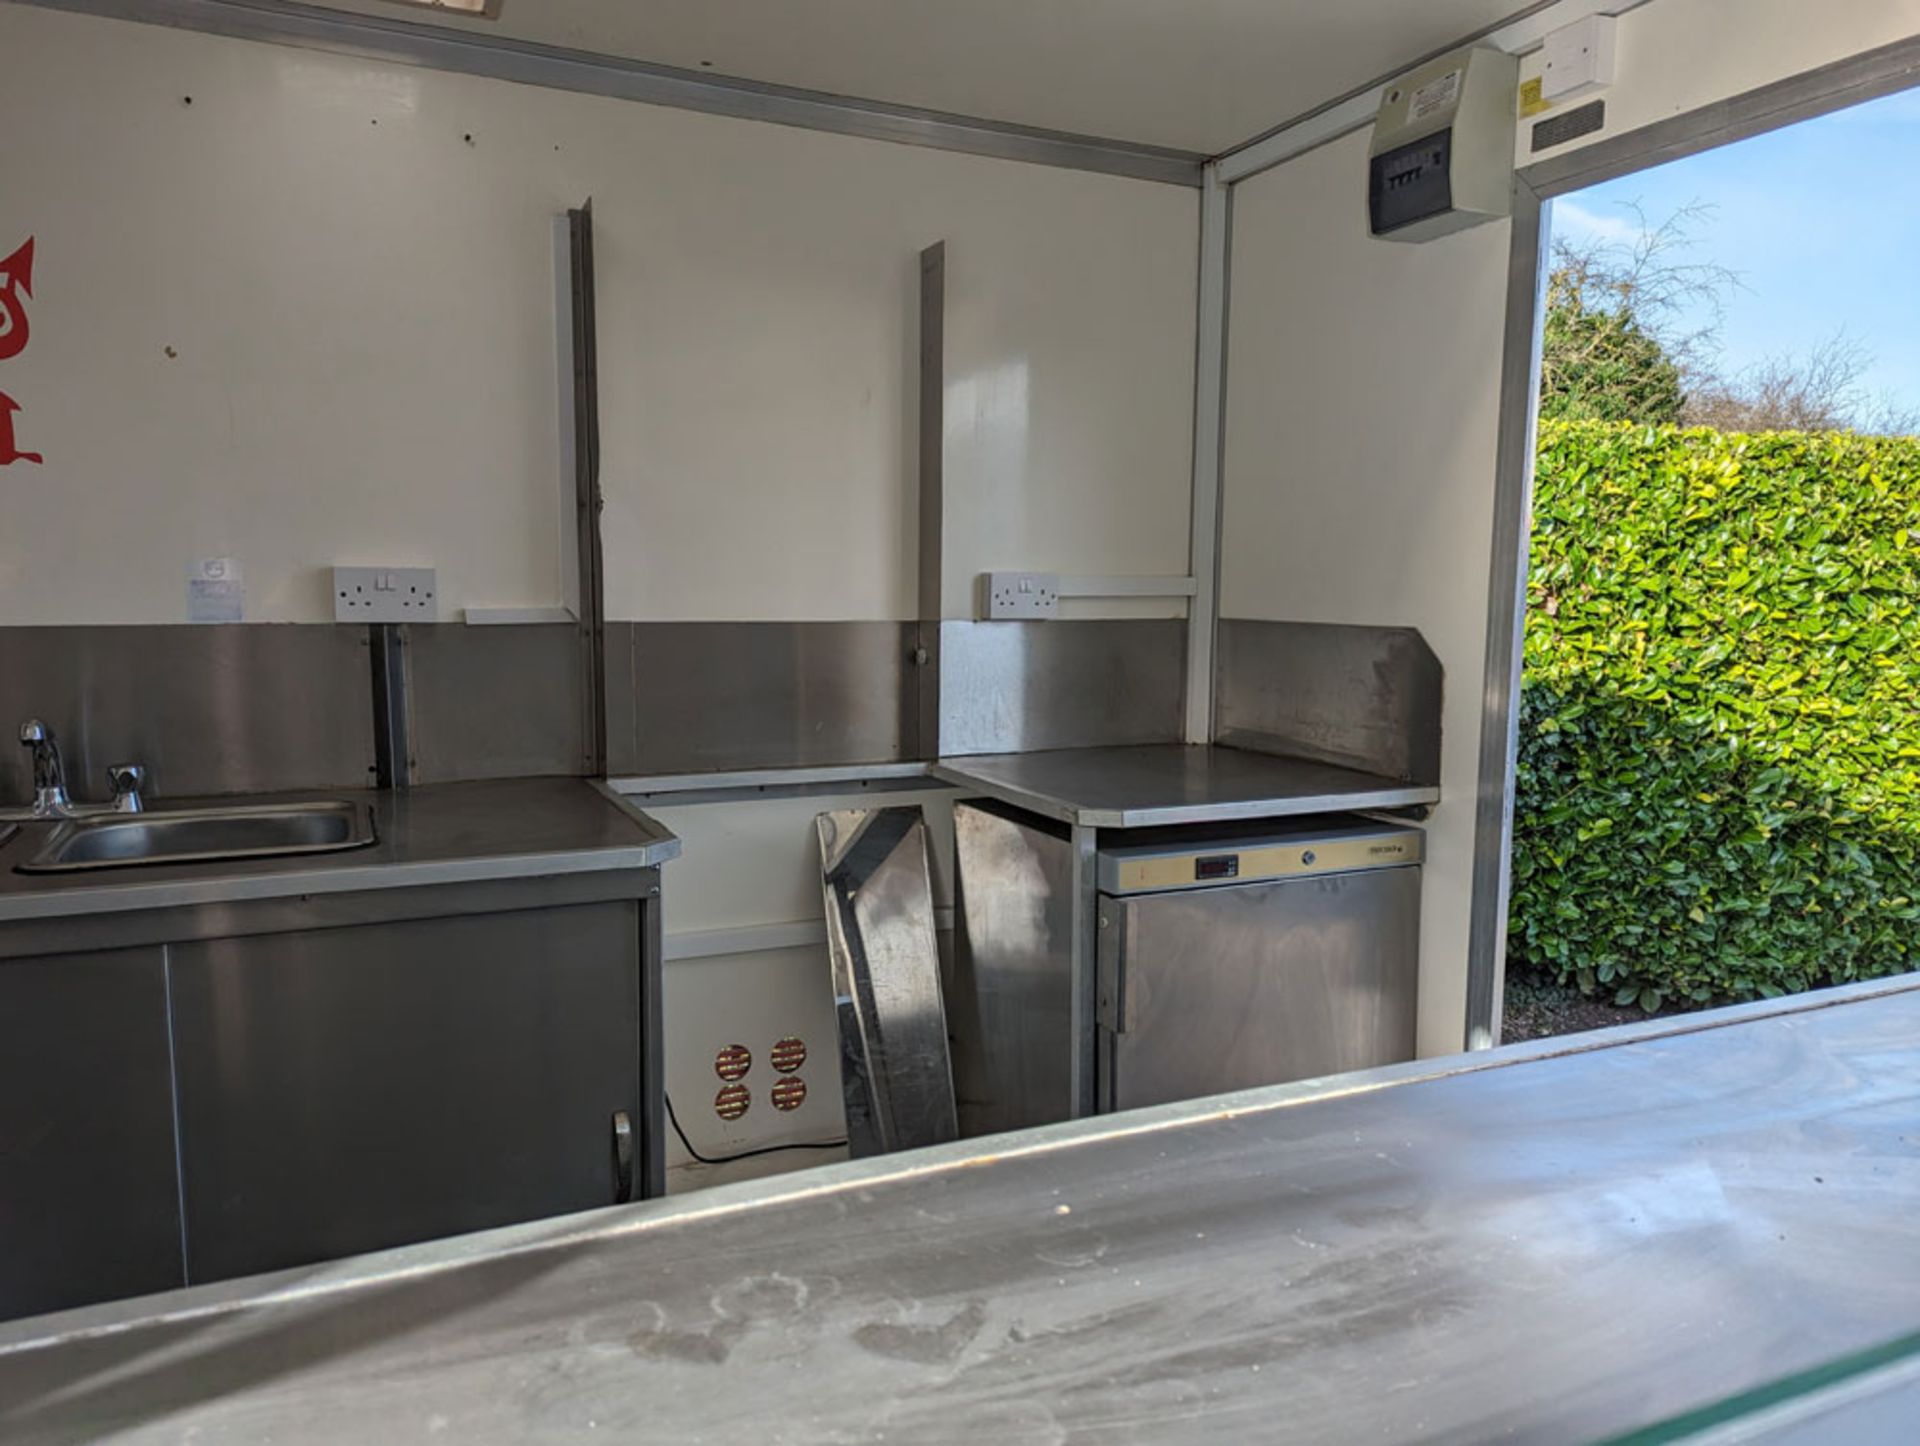 Catering Trailer. - Image 4 of 18